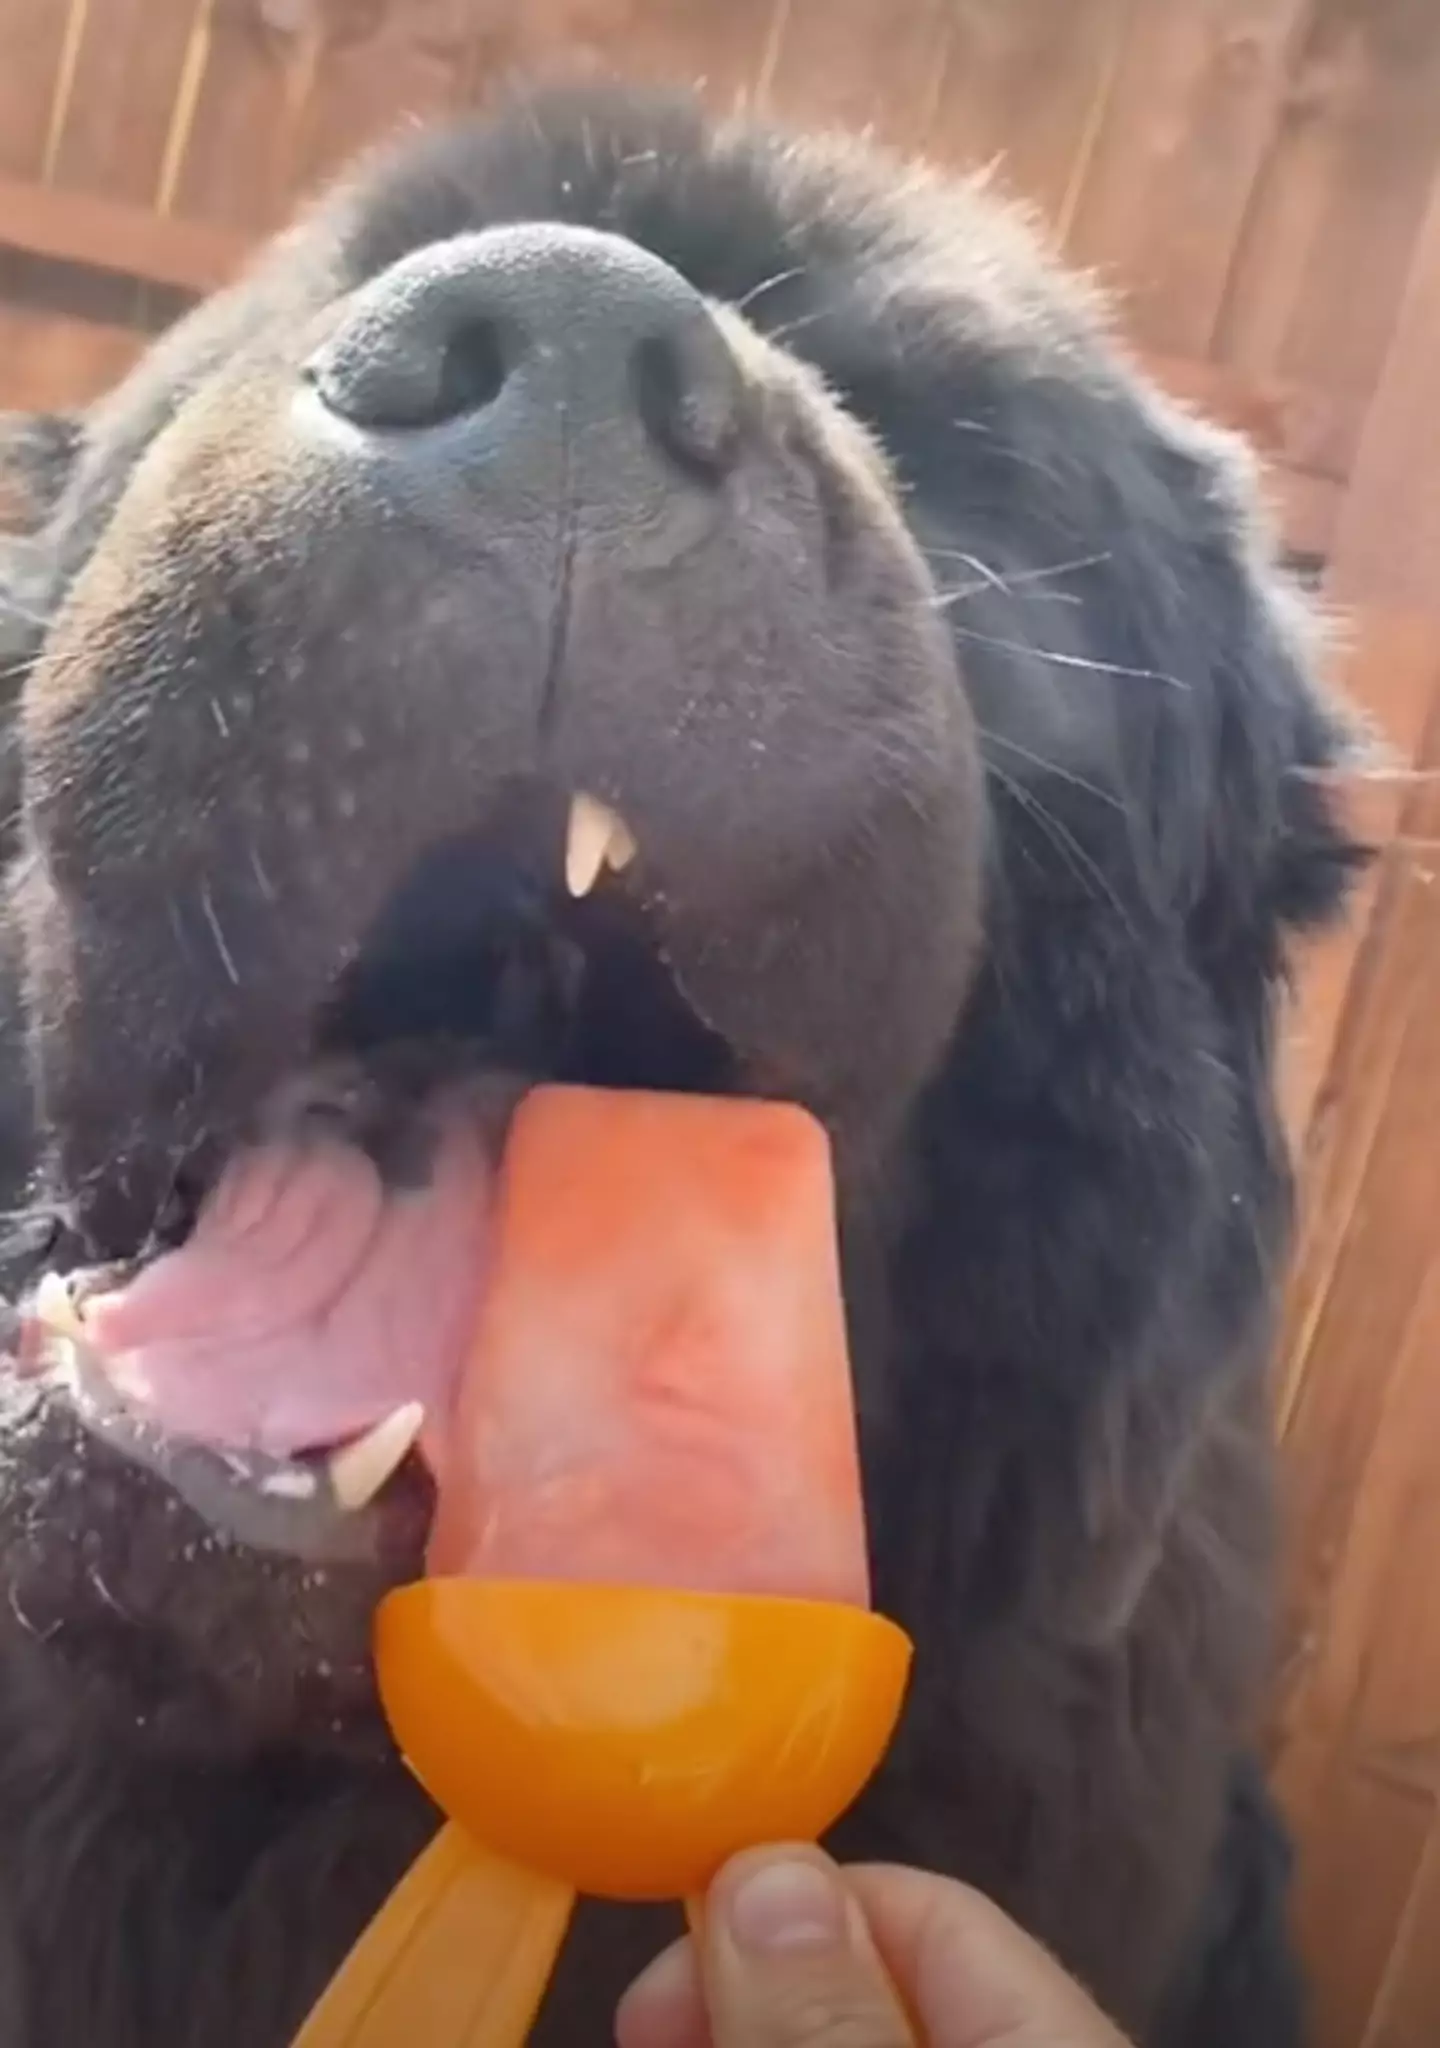 Dogs can eat frozen treats in moderation (